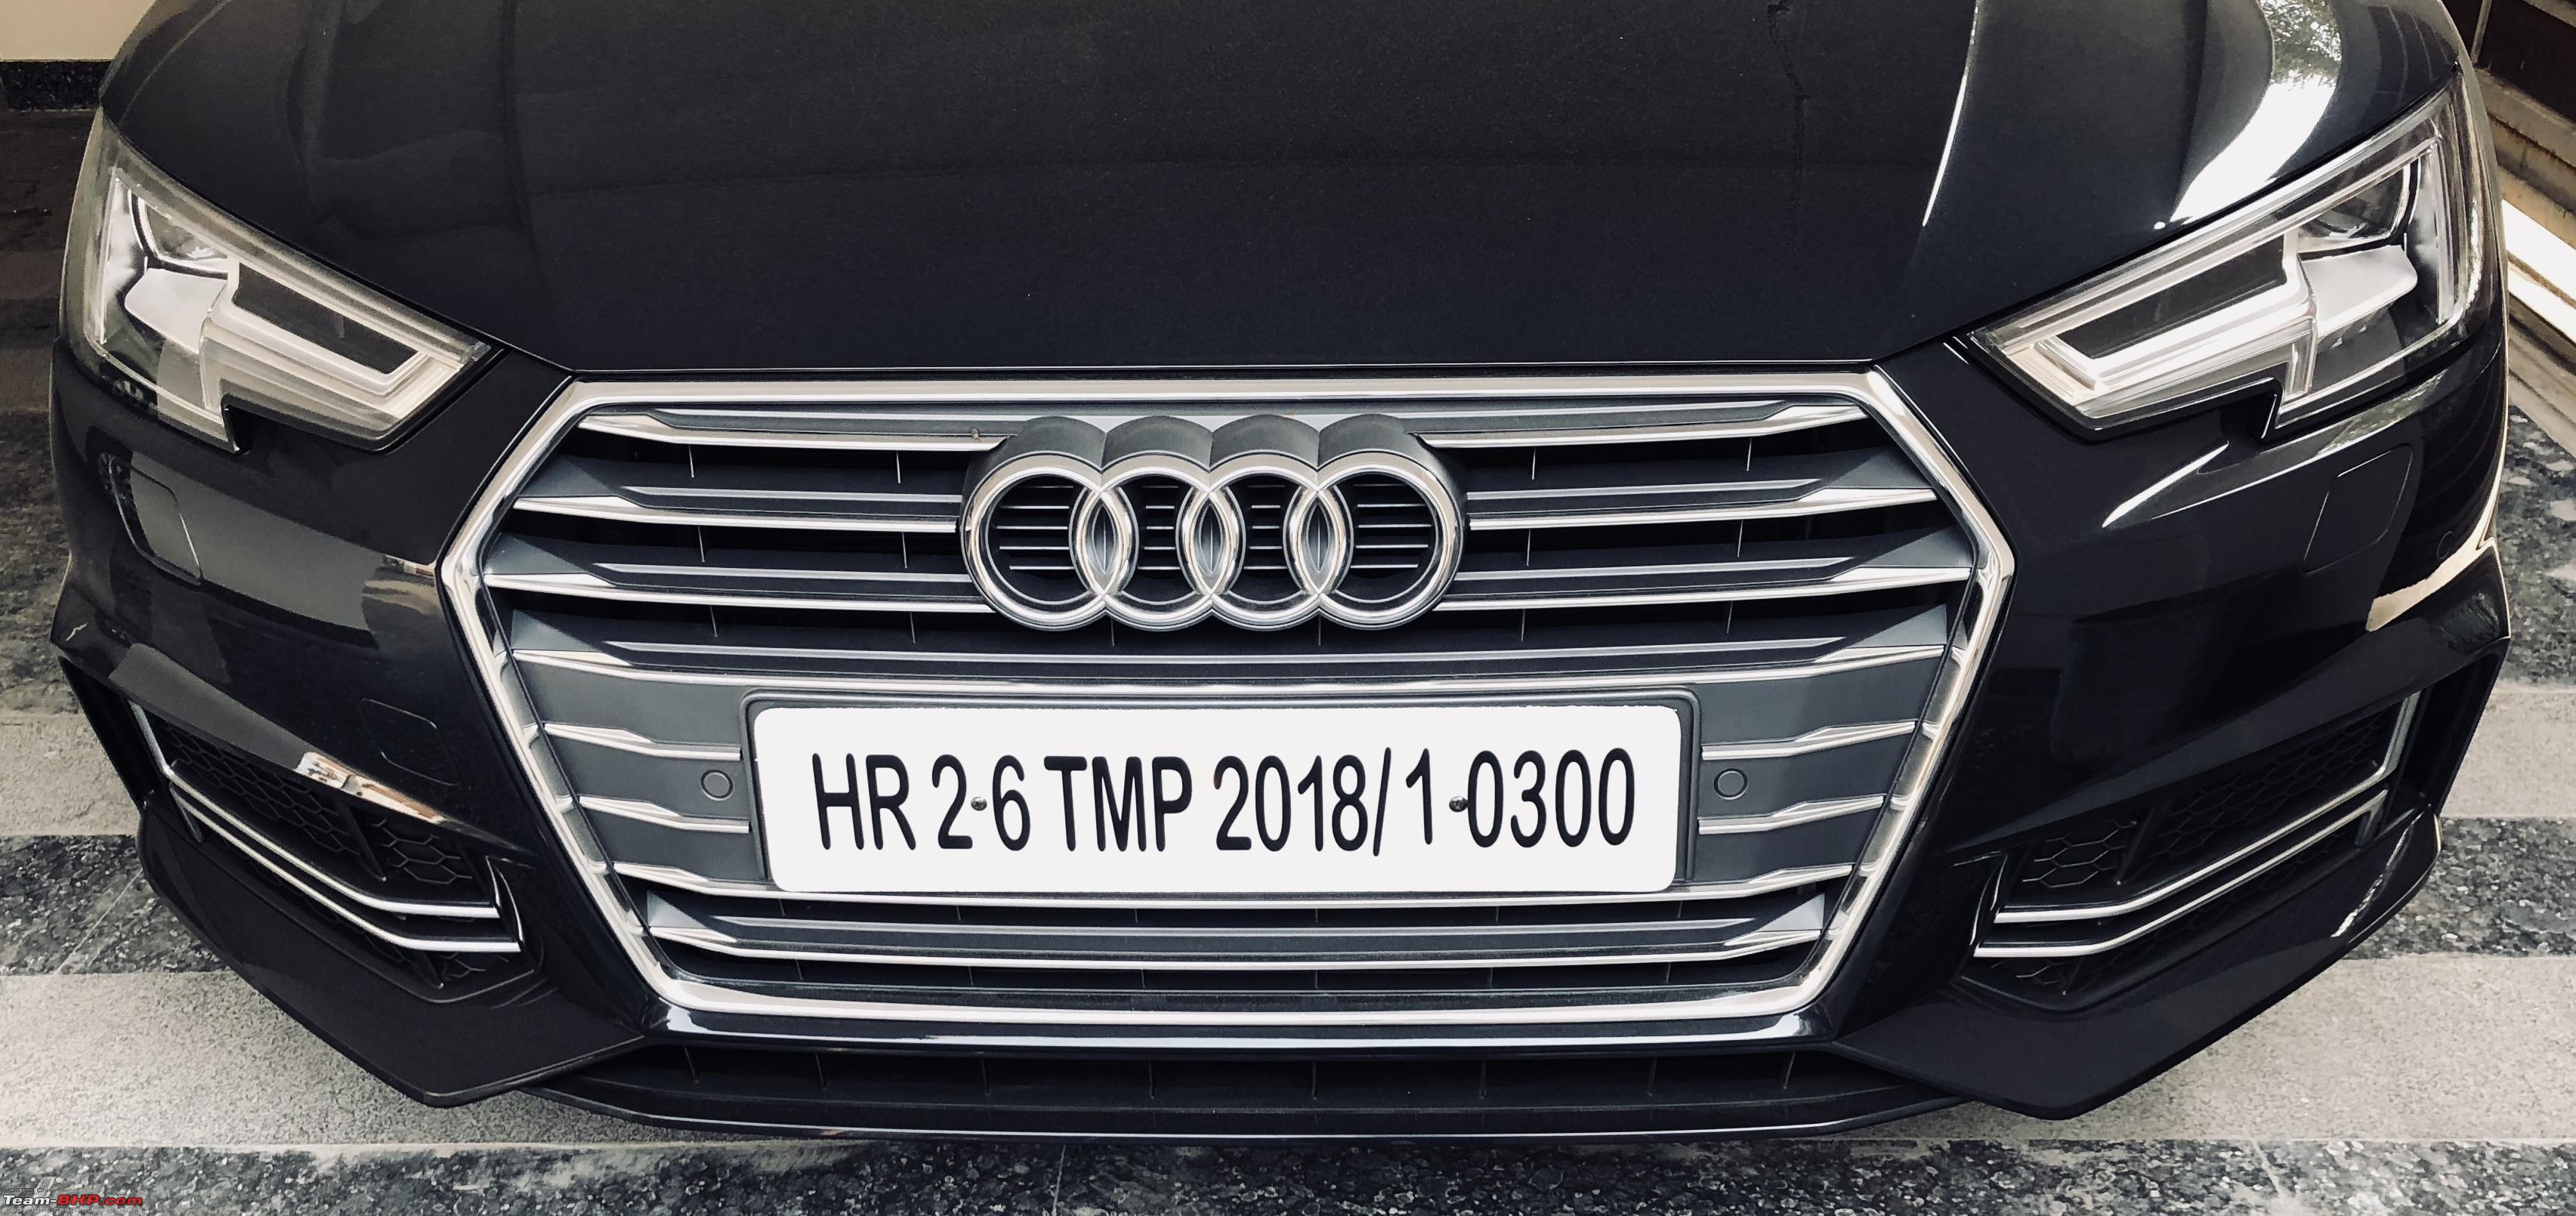 2 years with an Audi A4 - Living my dream - Team-BHP